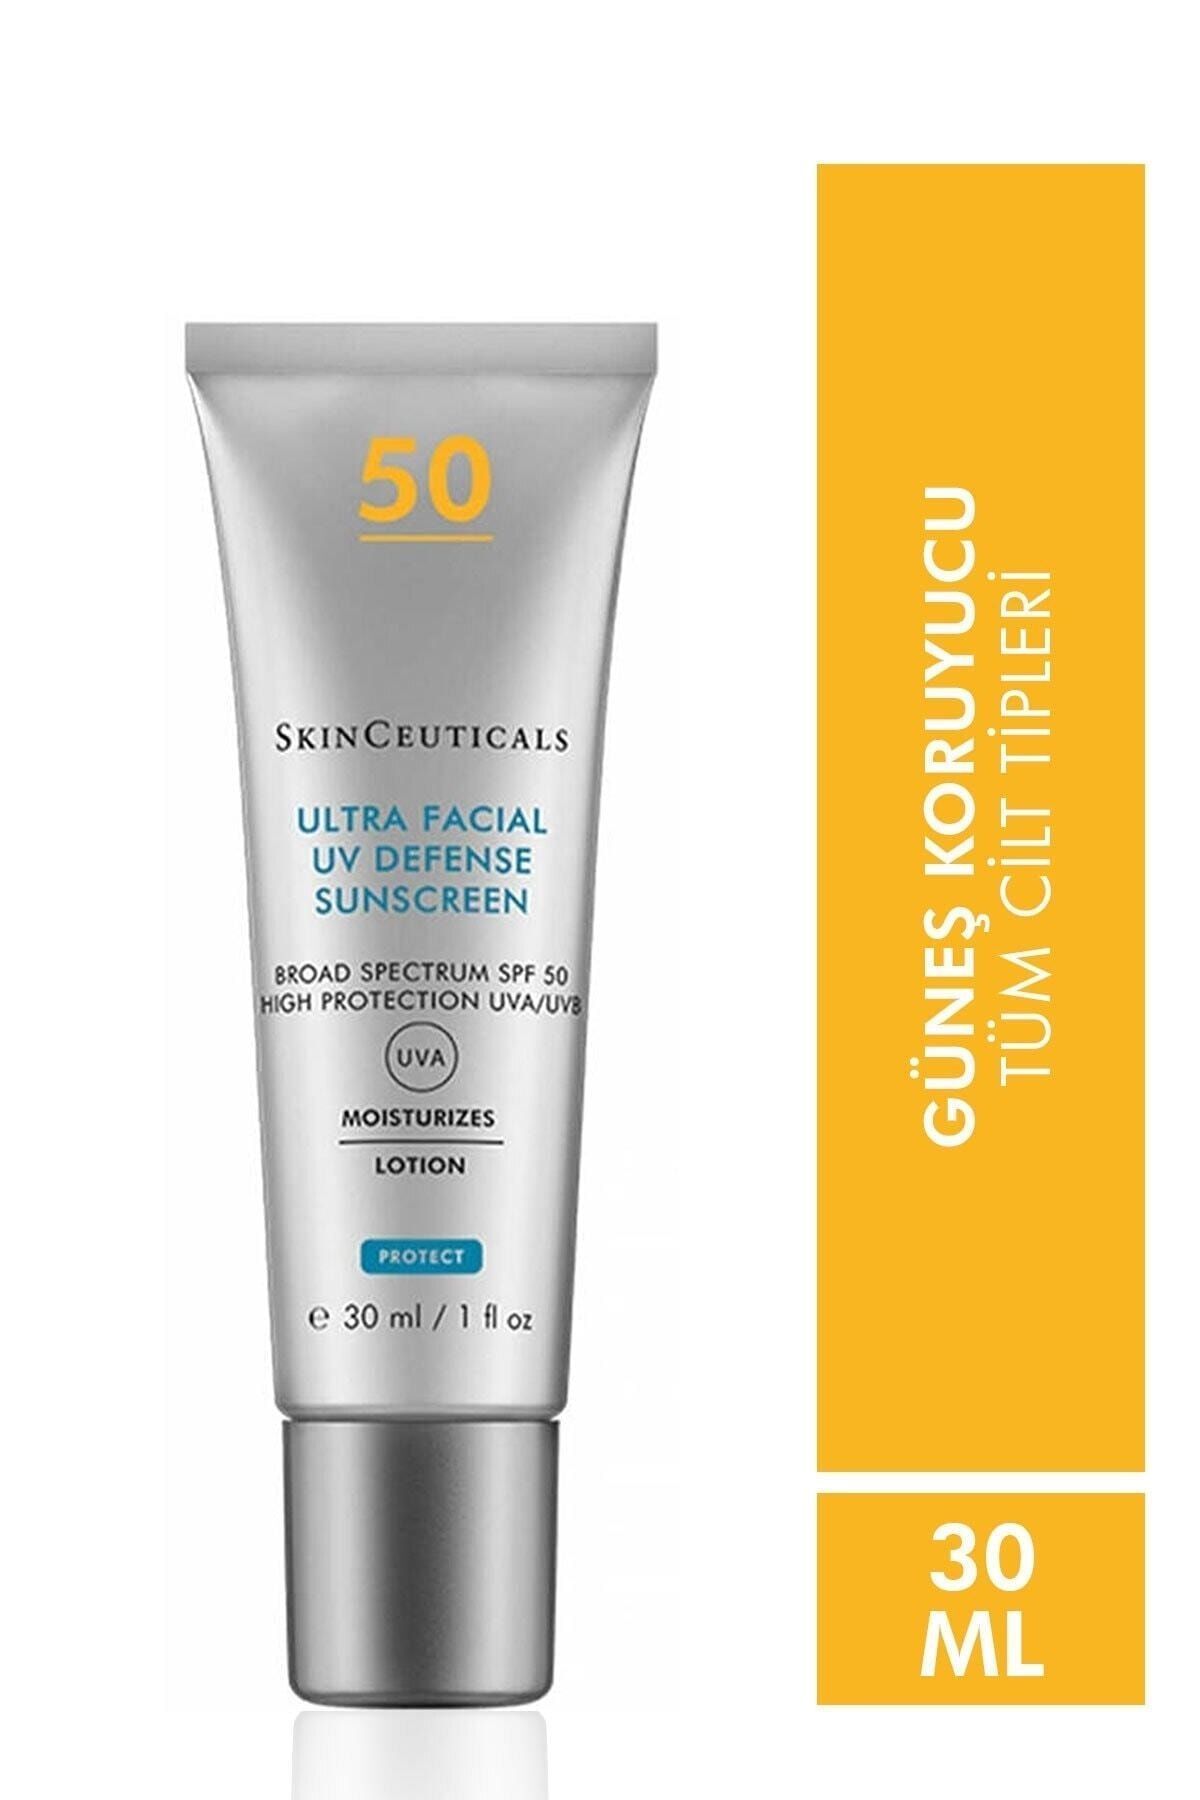 Skinceuticals HİGH PROTECTİON LEVEL ULTRA FACE DEFENSE SPF 50 + SUNSCREEN 30 ML